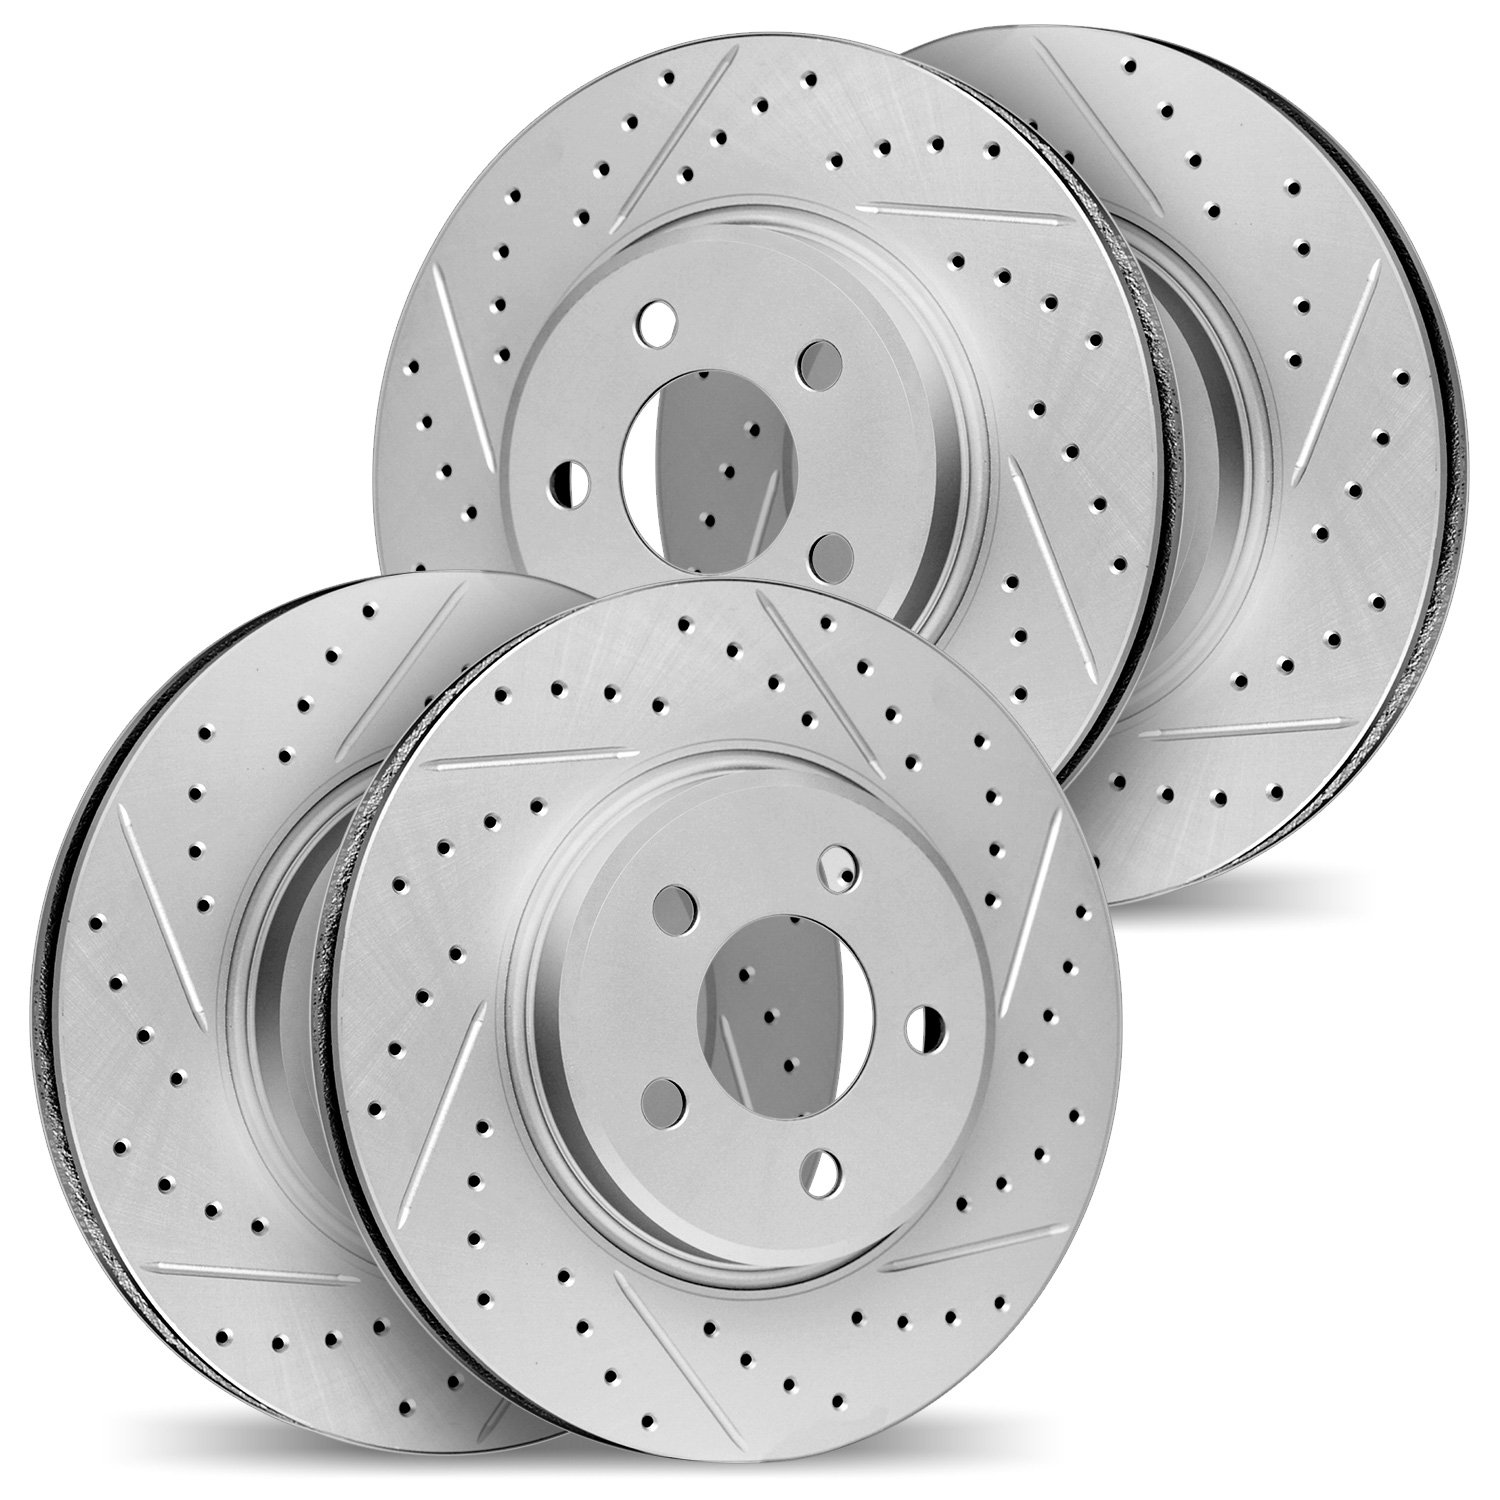 2004-02014 Geoperformance Drilled/Slotted Brake Rotors, 2014-2020 Porsche, Position: Front and Rear